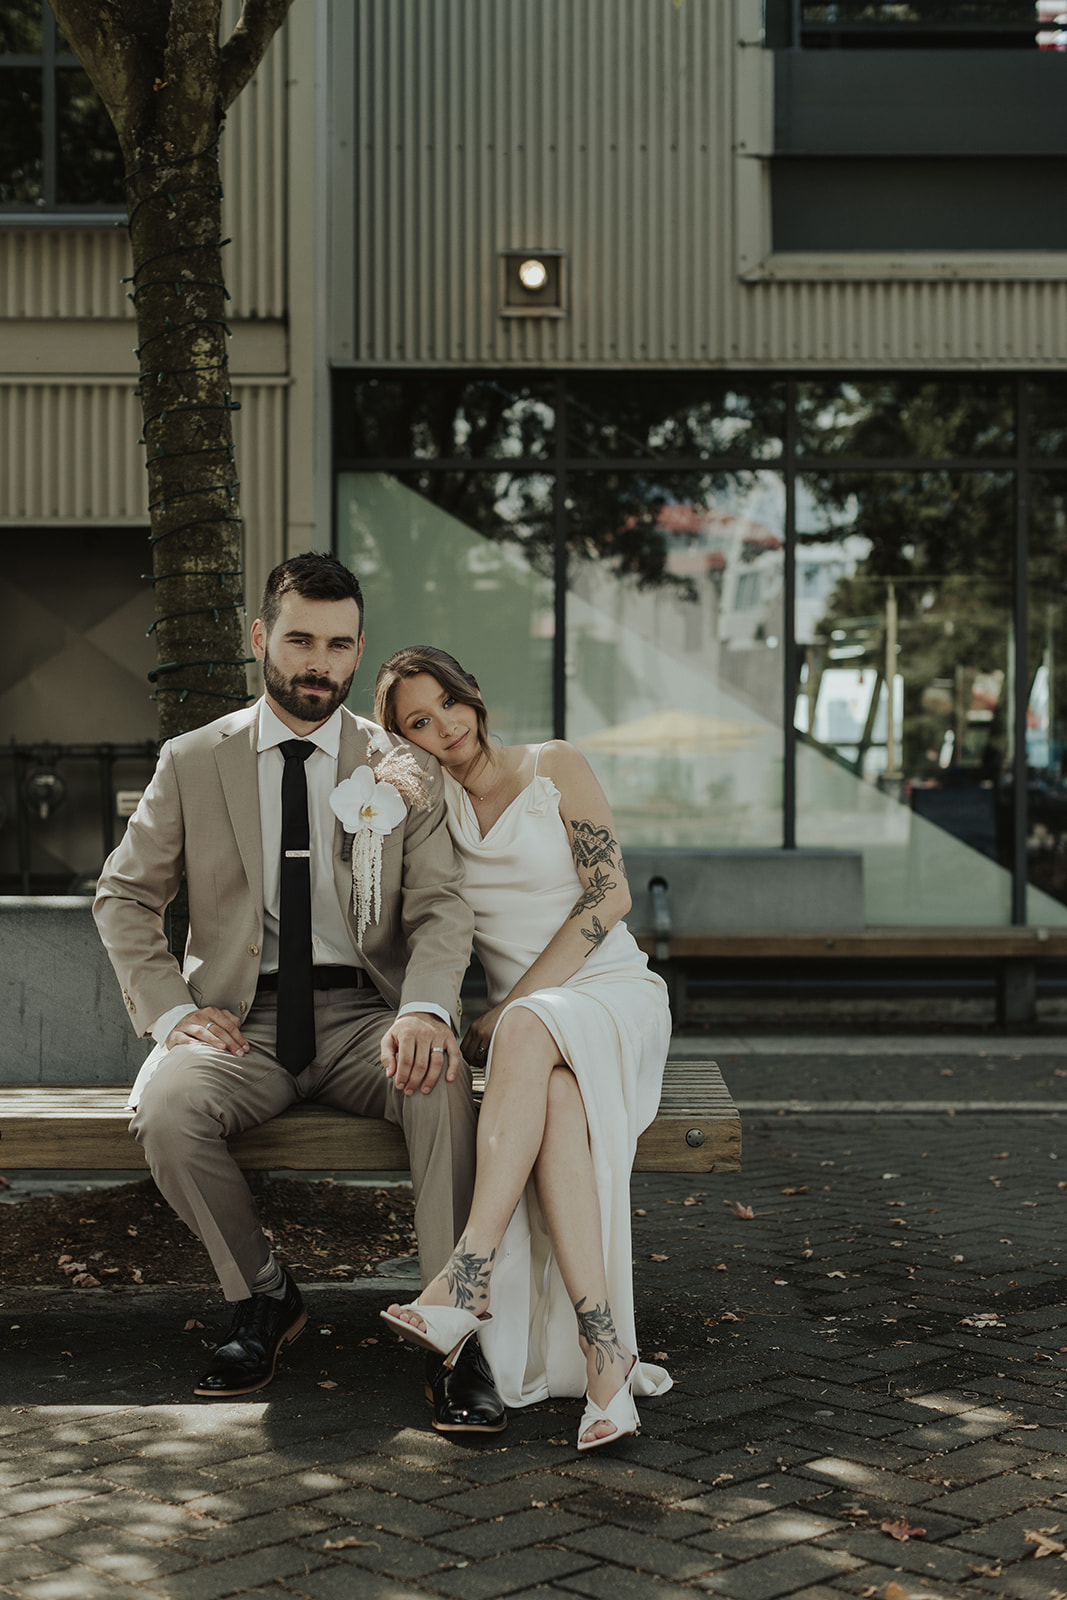 Bride and groom sitting together on a bench downtown. Captured by Vancouver wedding photographers Jeff and Cat of The Apartment Photo.